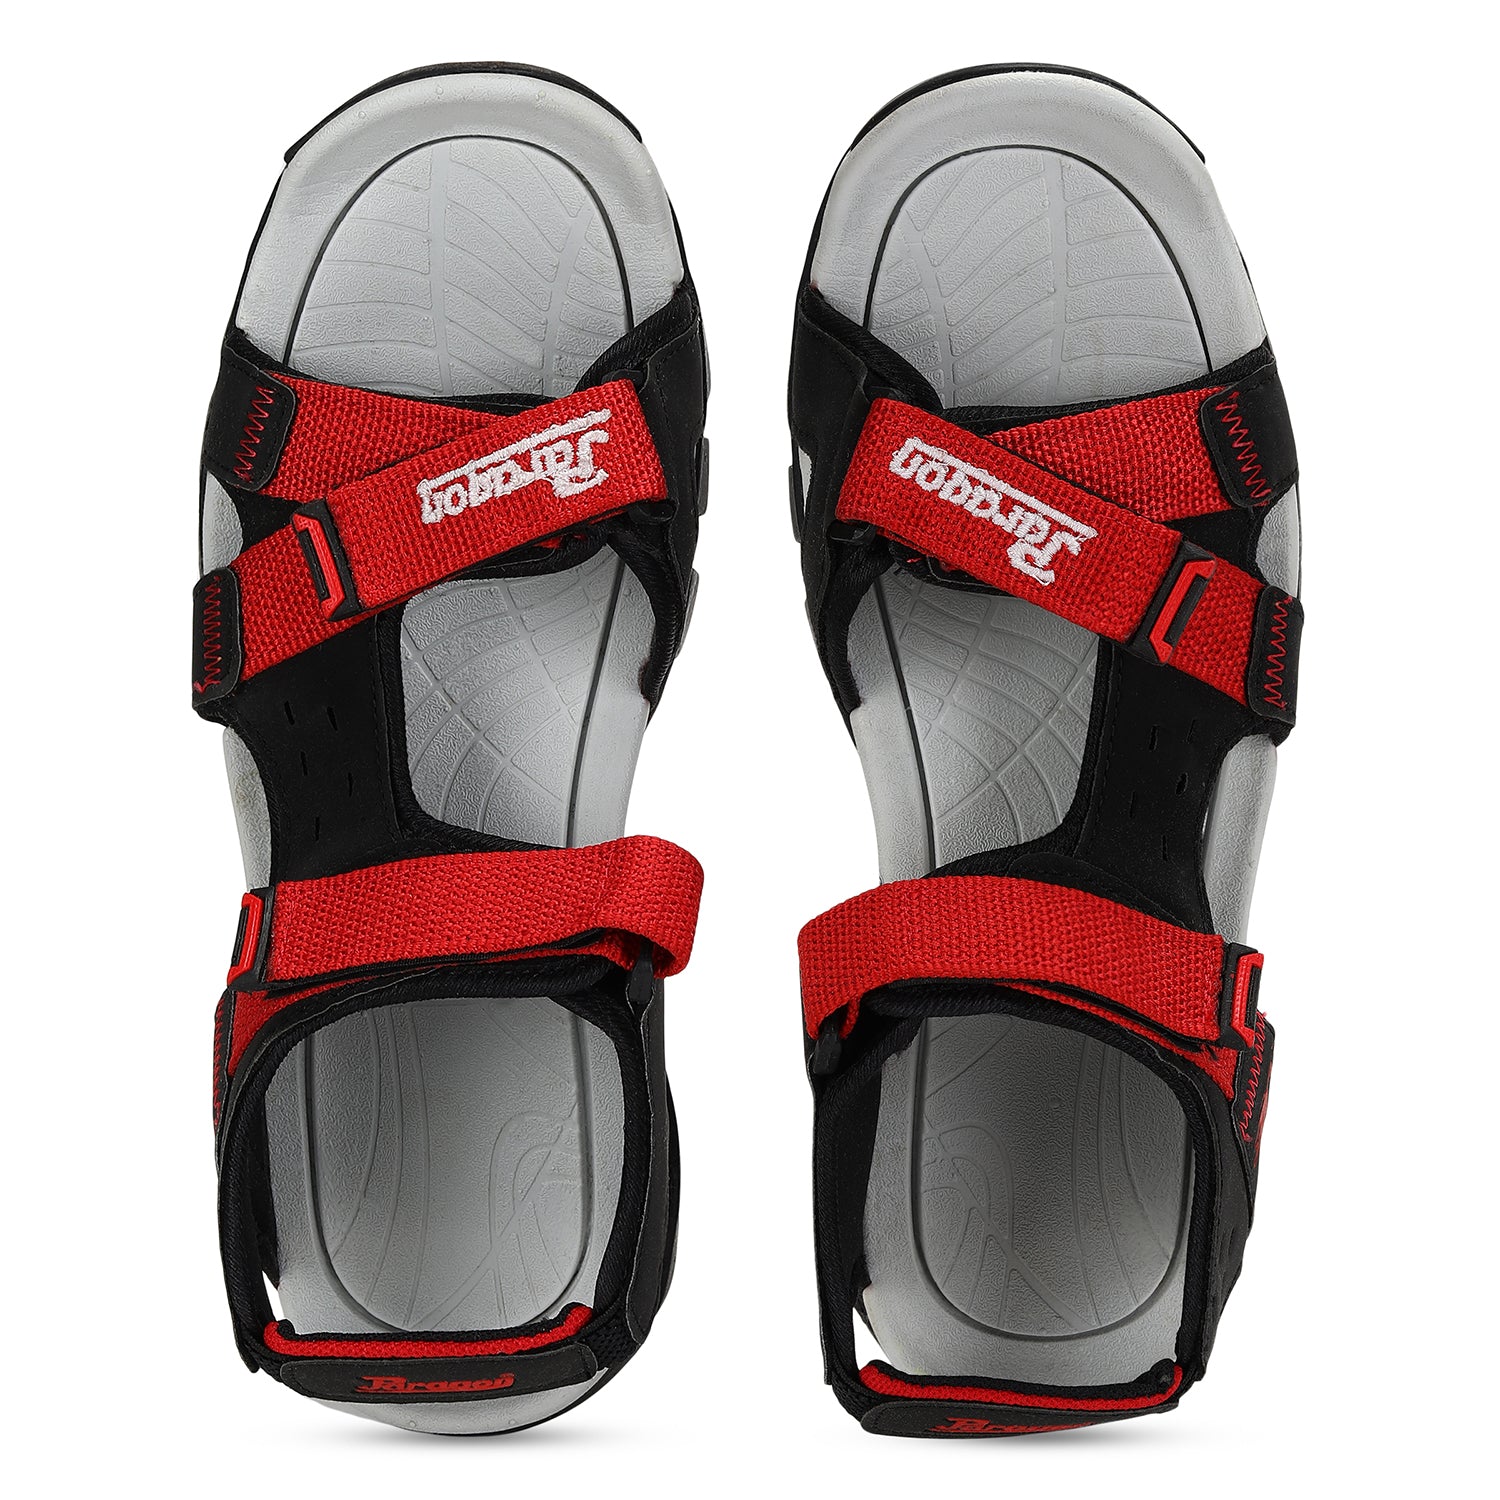 Paragon K1403G Men Stylish Sandals | Comfortable Sandals for Daily Outdoor Use | Casual Formal Sandals with Cushioned Soles